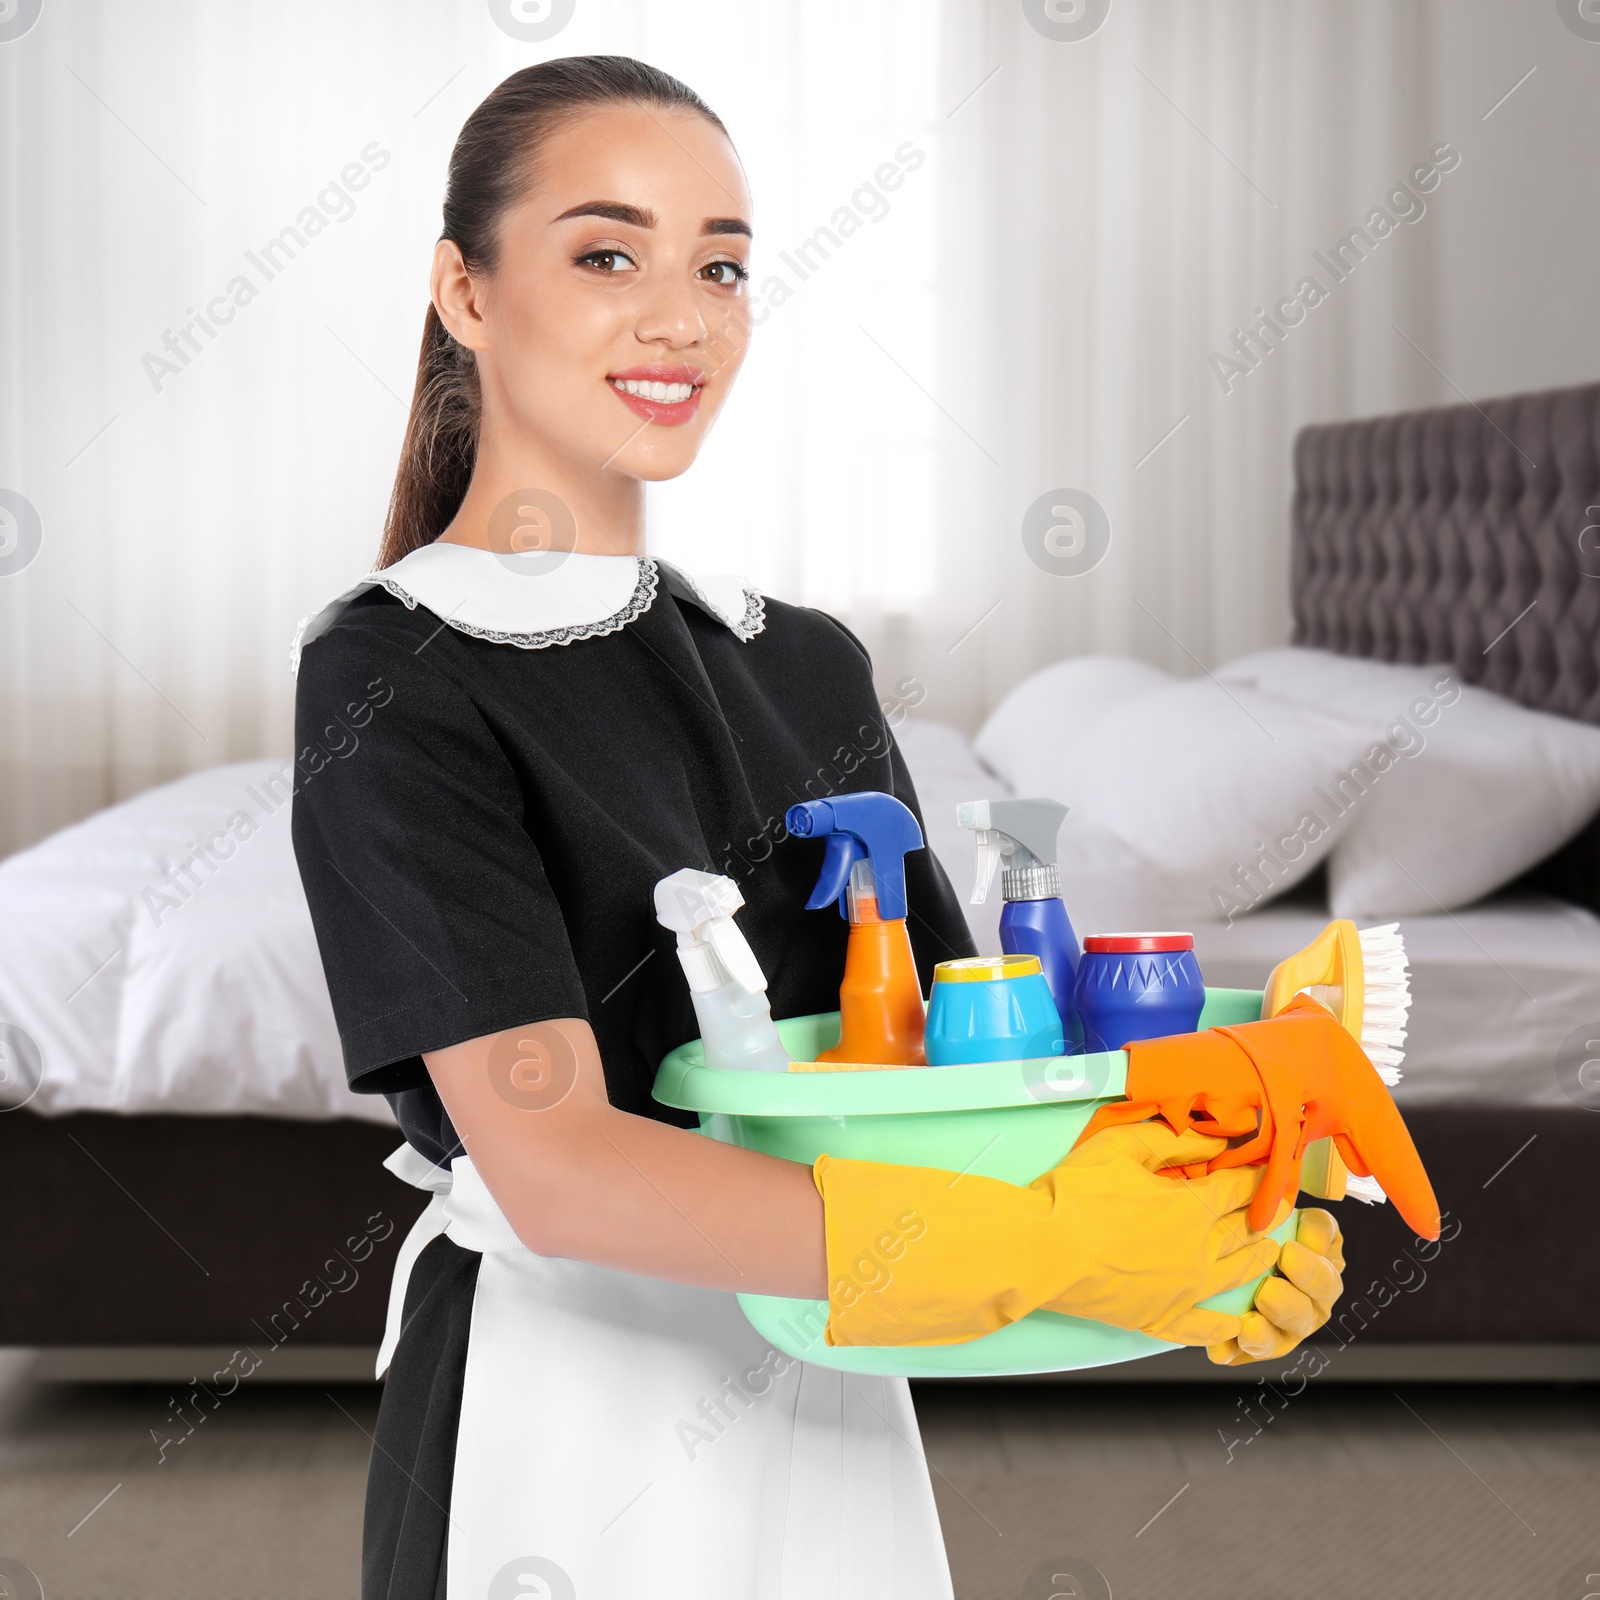 Image of Beautiful chambermaid with cleaning supplies near bed in hotel room